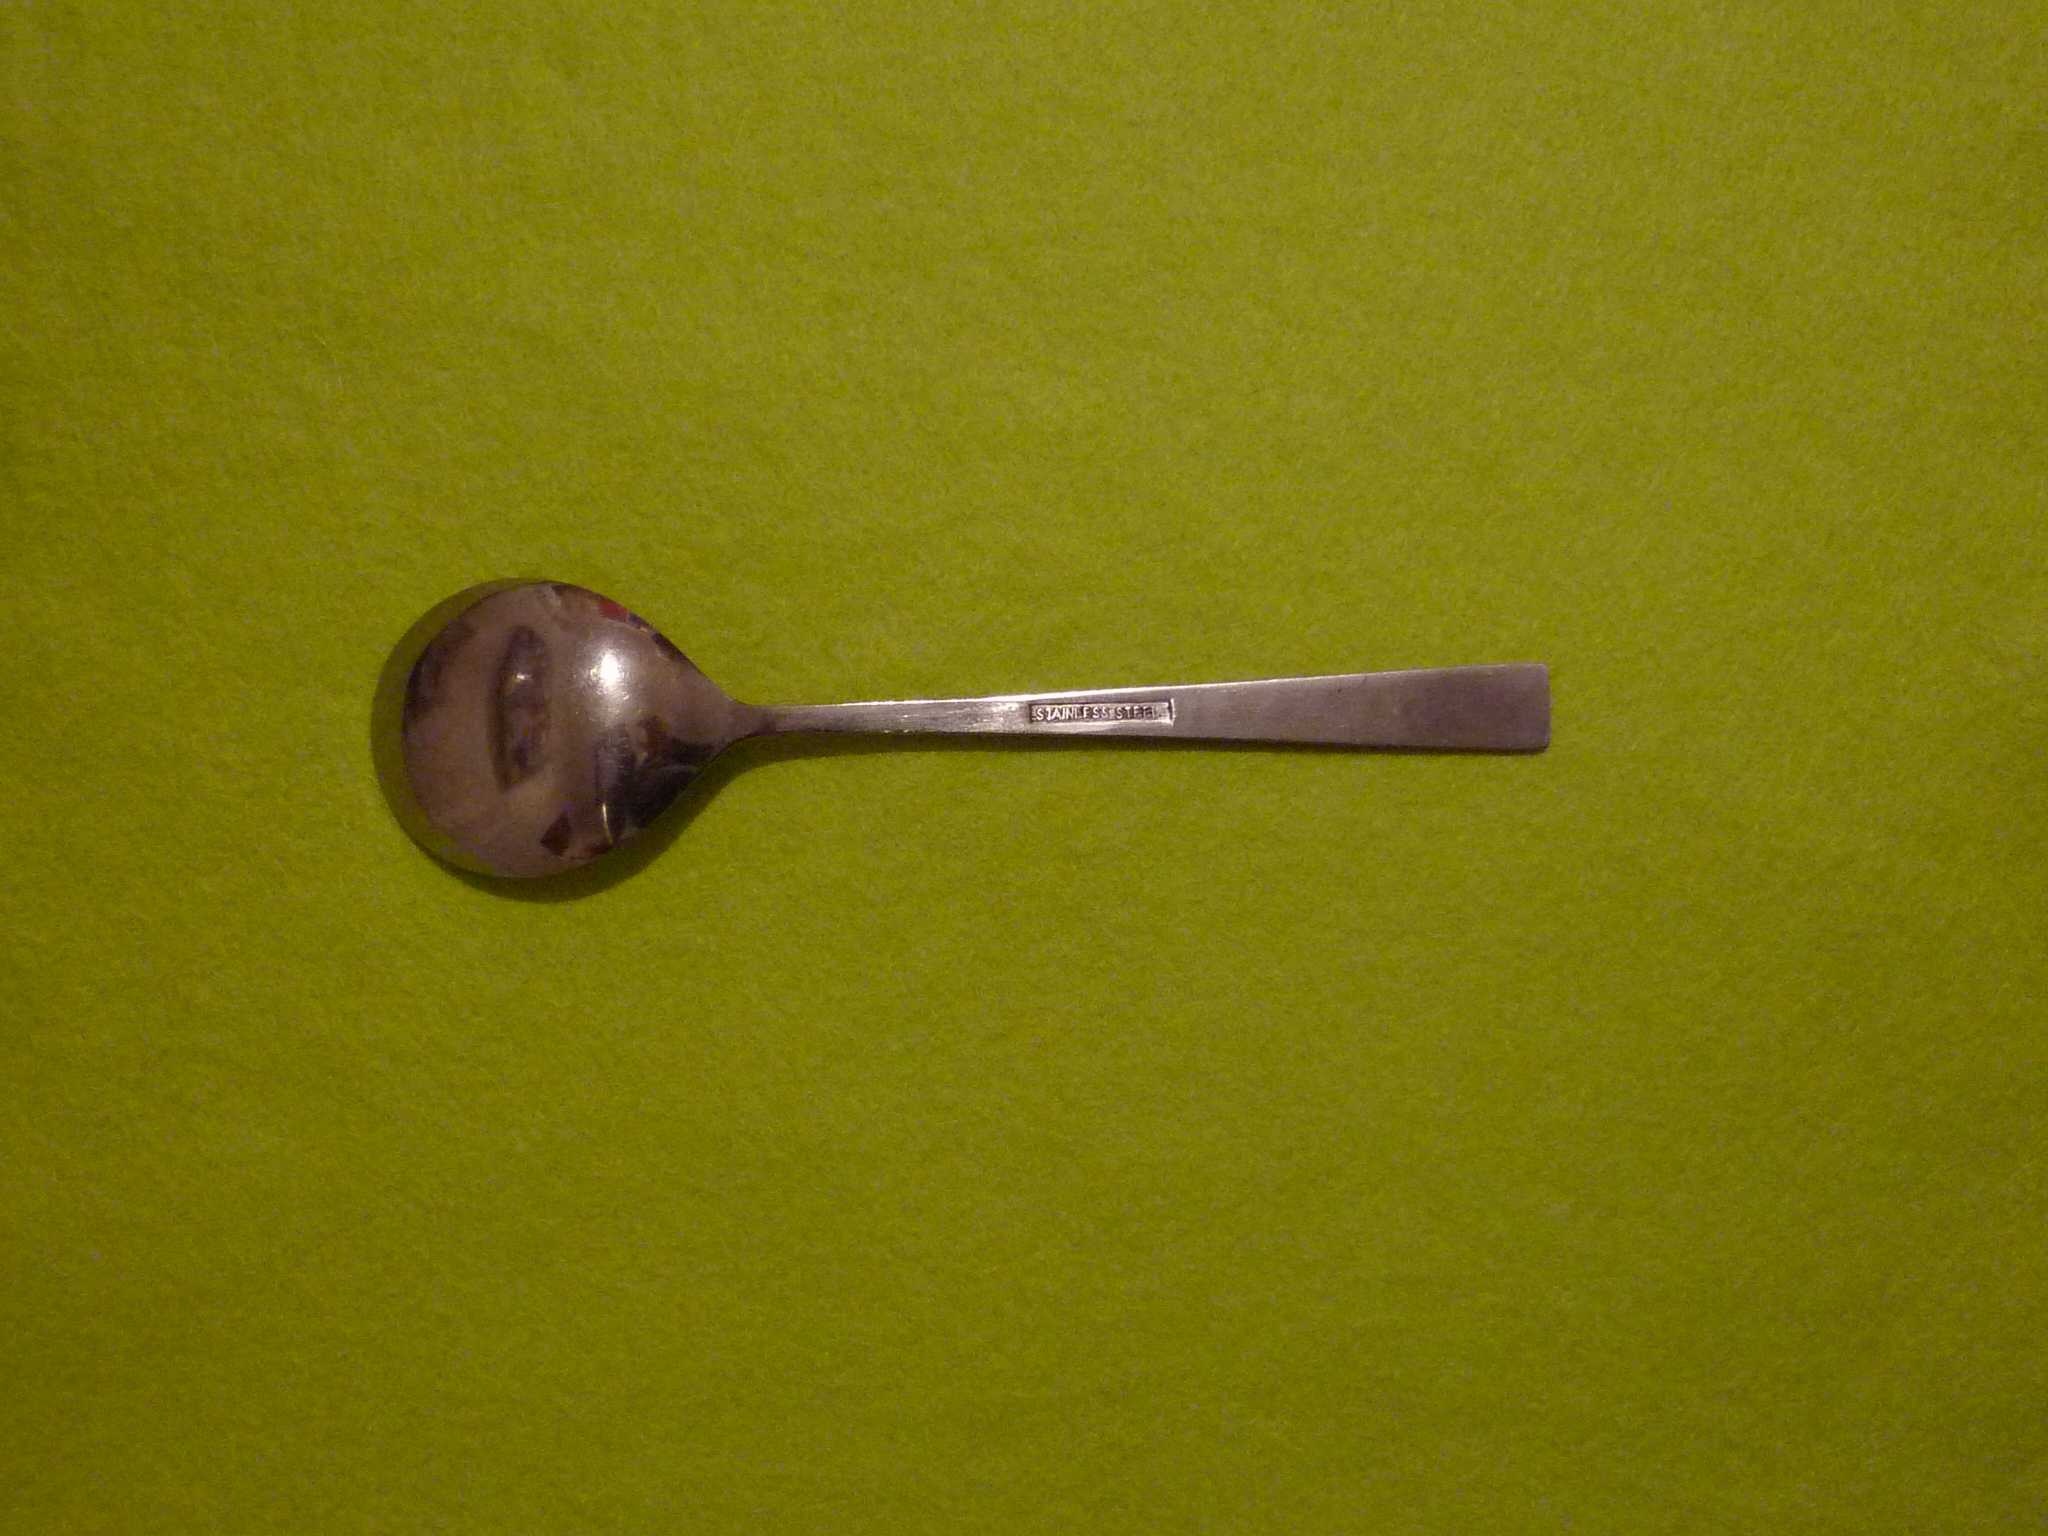 Soup spoon image classifcation dataset for machine learning